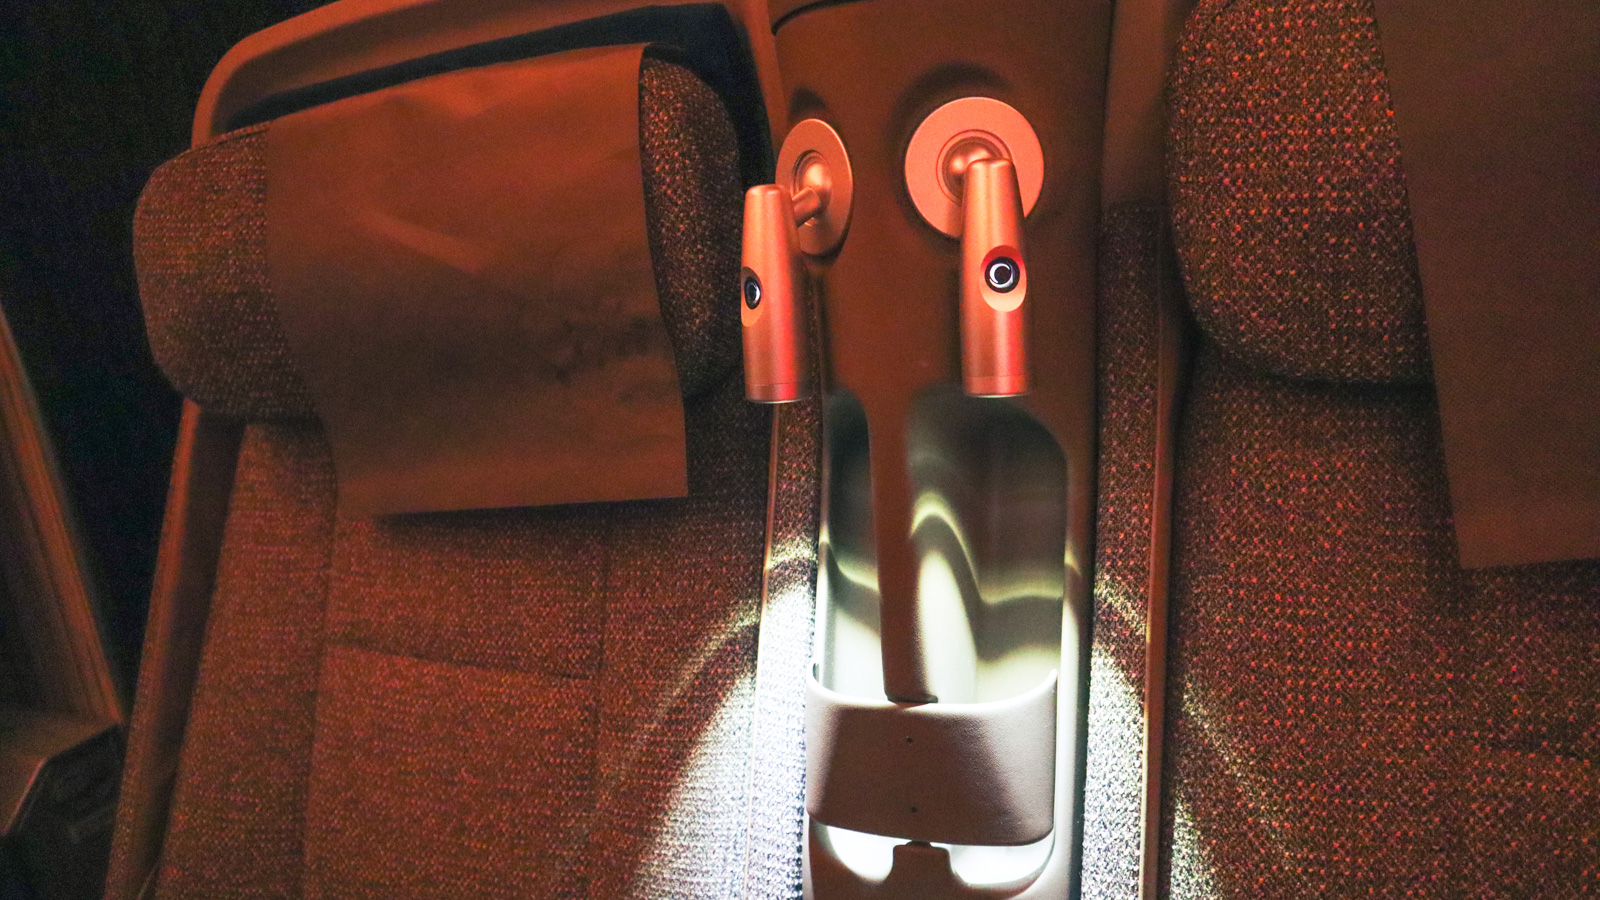 Reading lights on China Airlines A350 Premium Economy